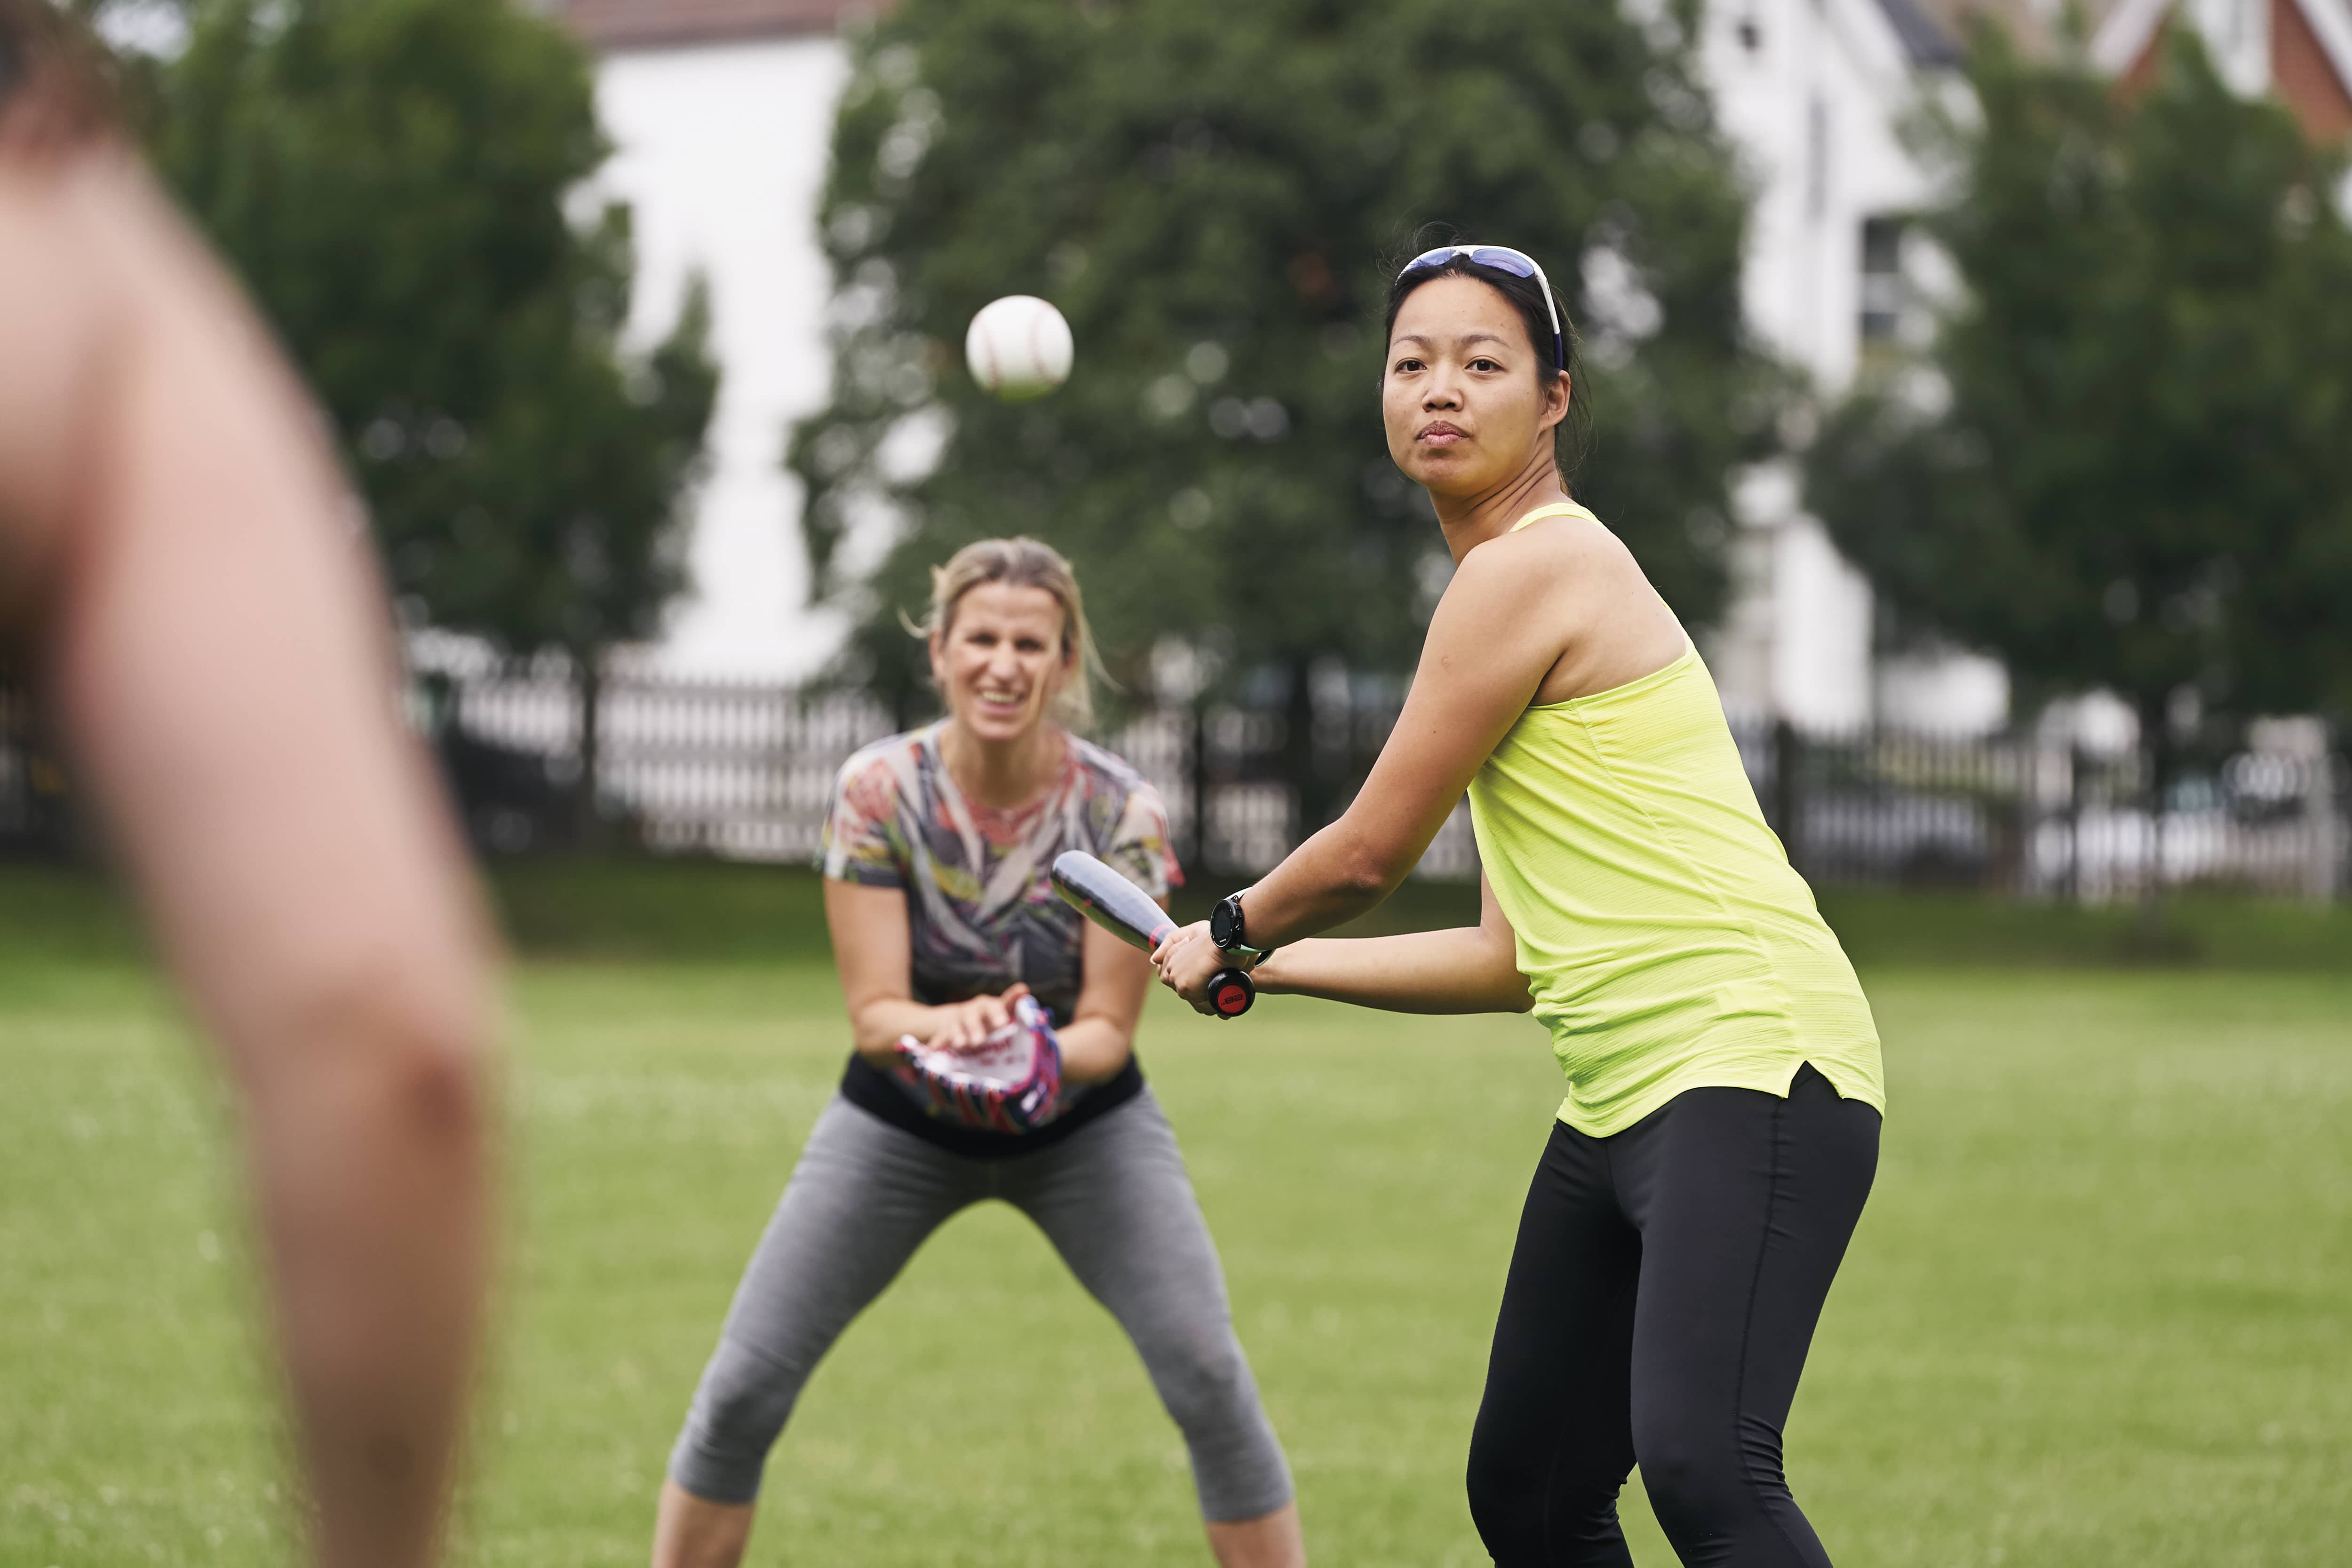 women playing rounders in the park